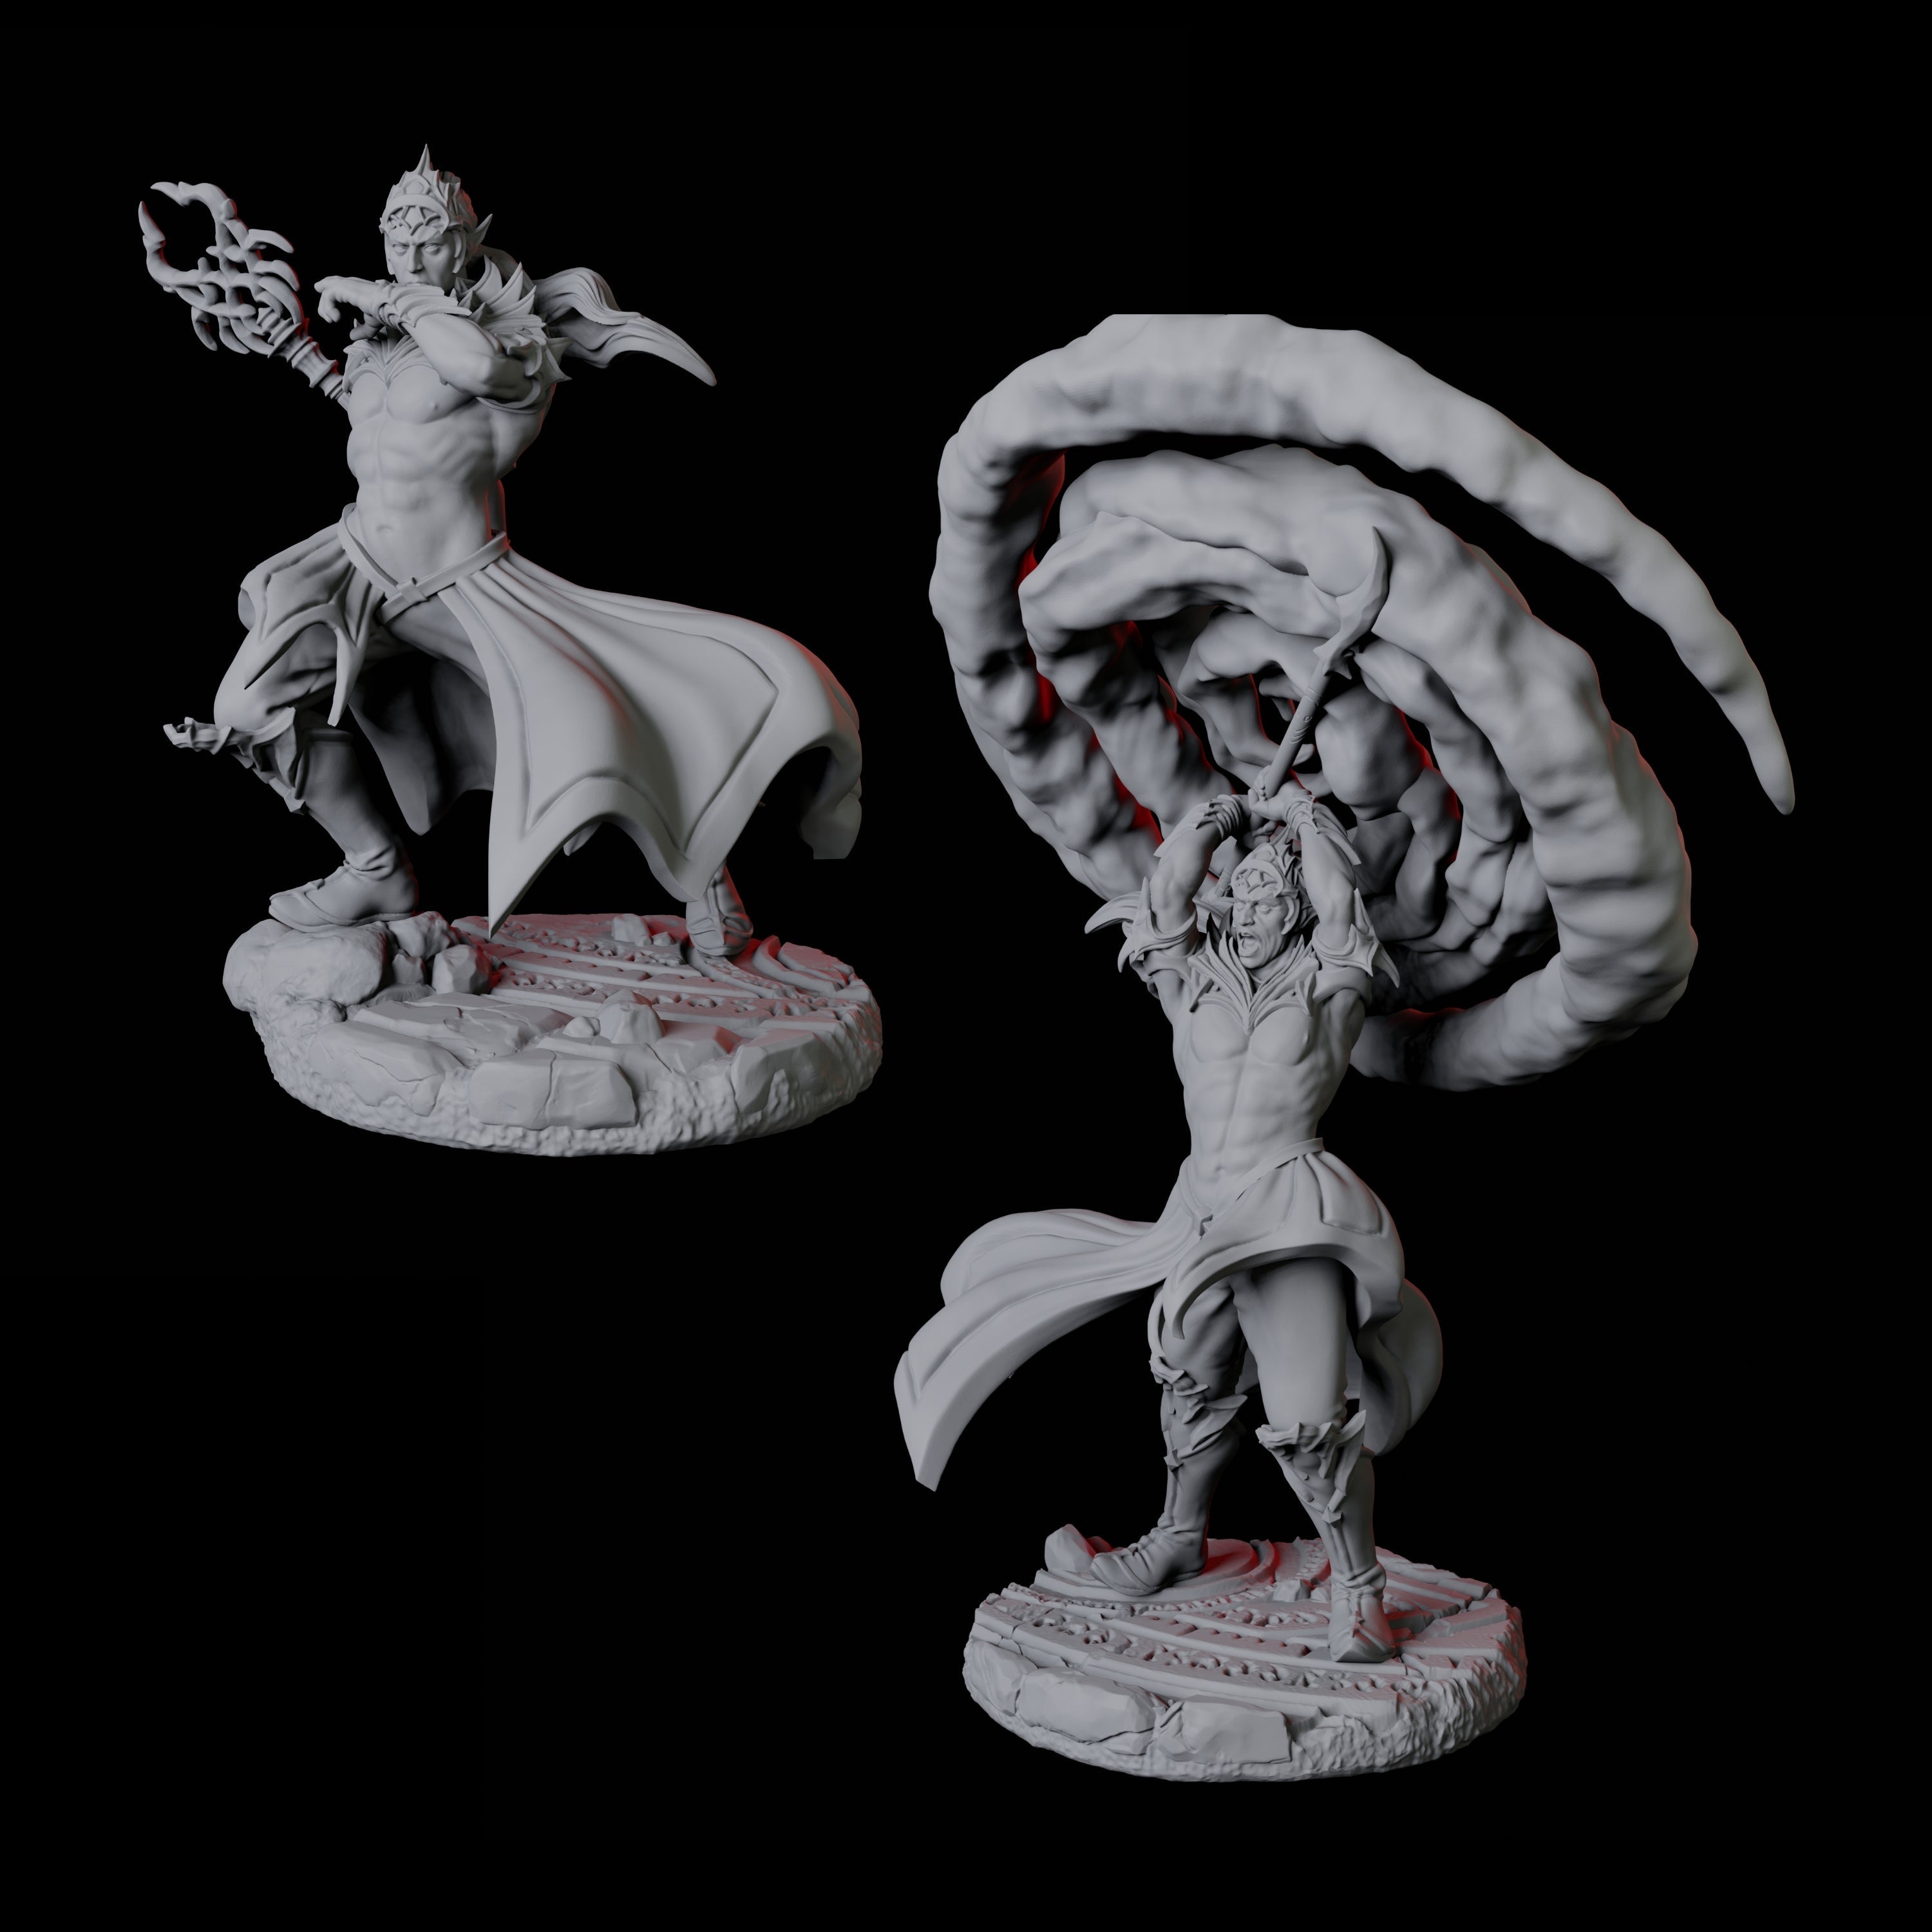 Two Mage Adepts Miniature for Dungeons and Dragons, Pathfinder or other TTRPGs